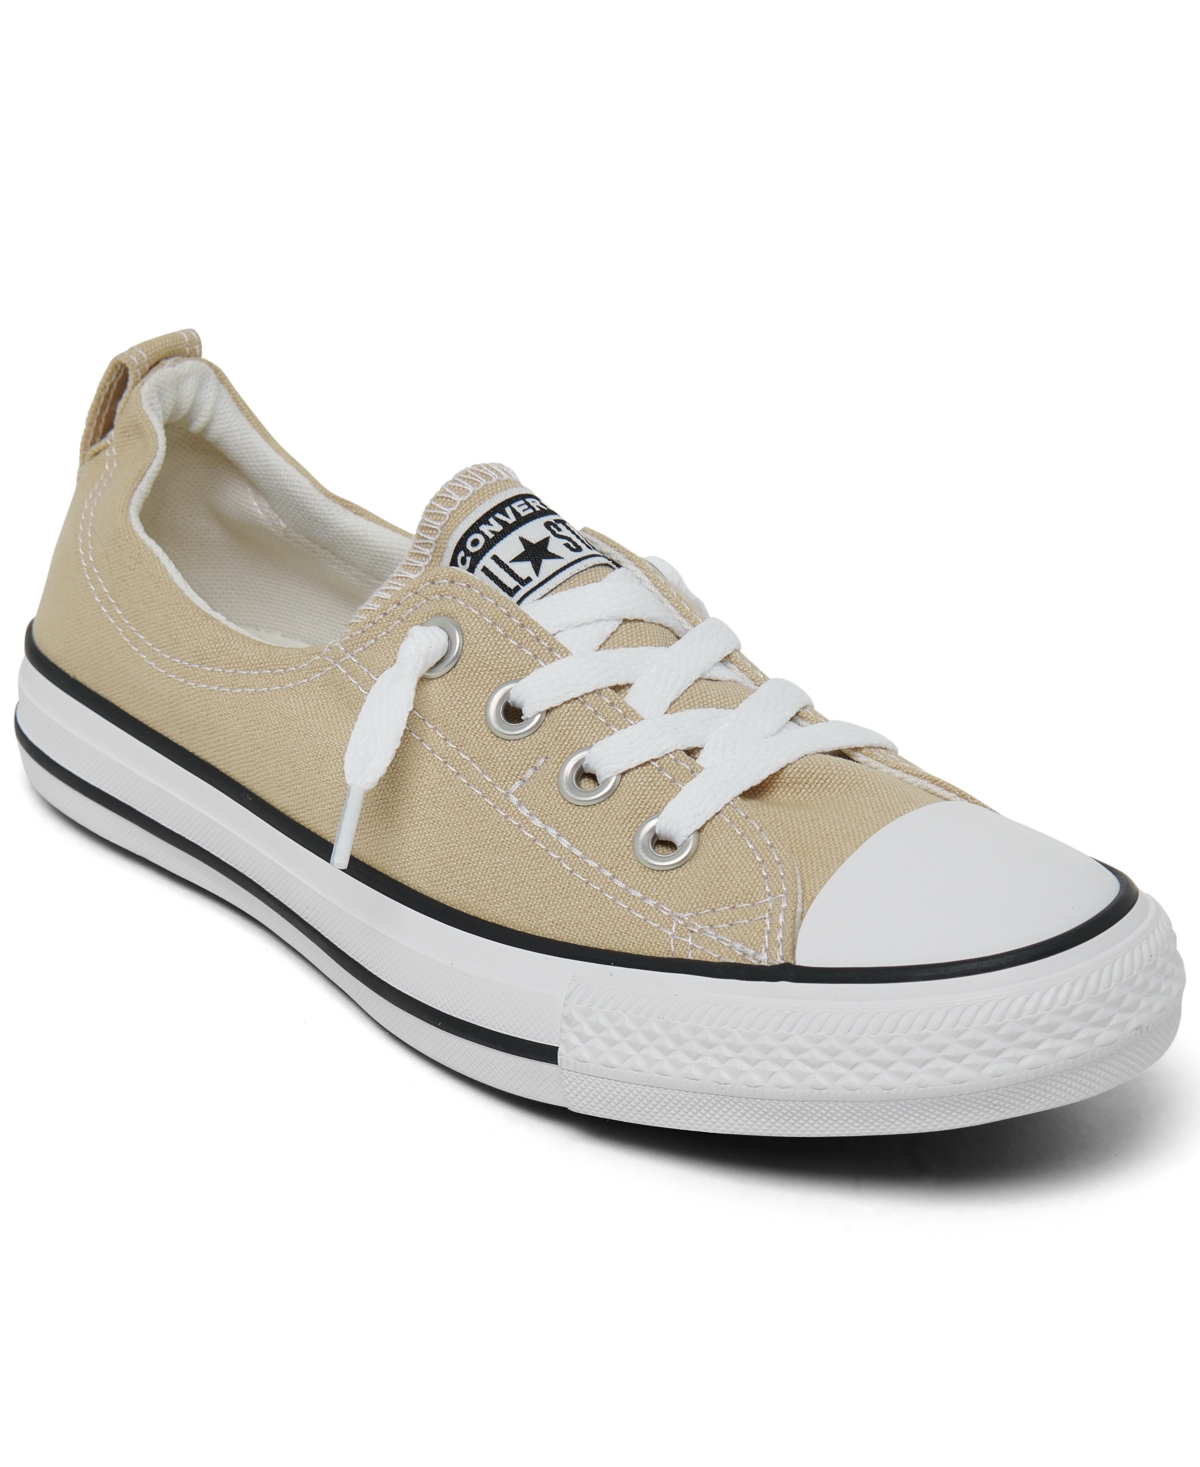 CONVERSE WOMEN'S CHUCK TAYLOR ALL STAR SHORELINE LOW CASUAL SNEAKERS FROM FINISH LINE